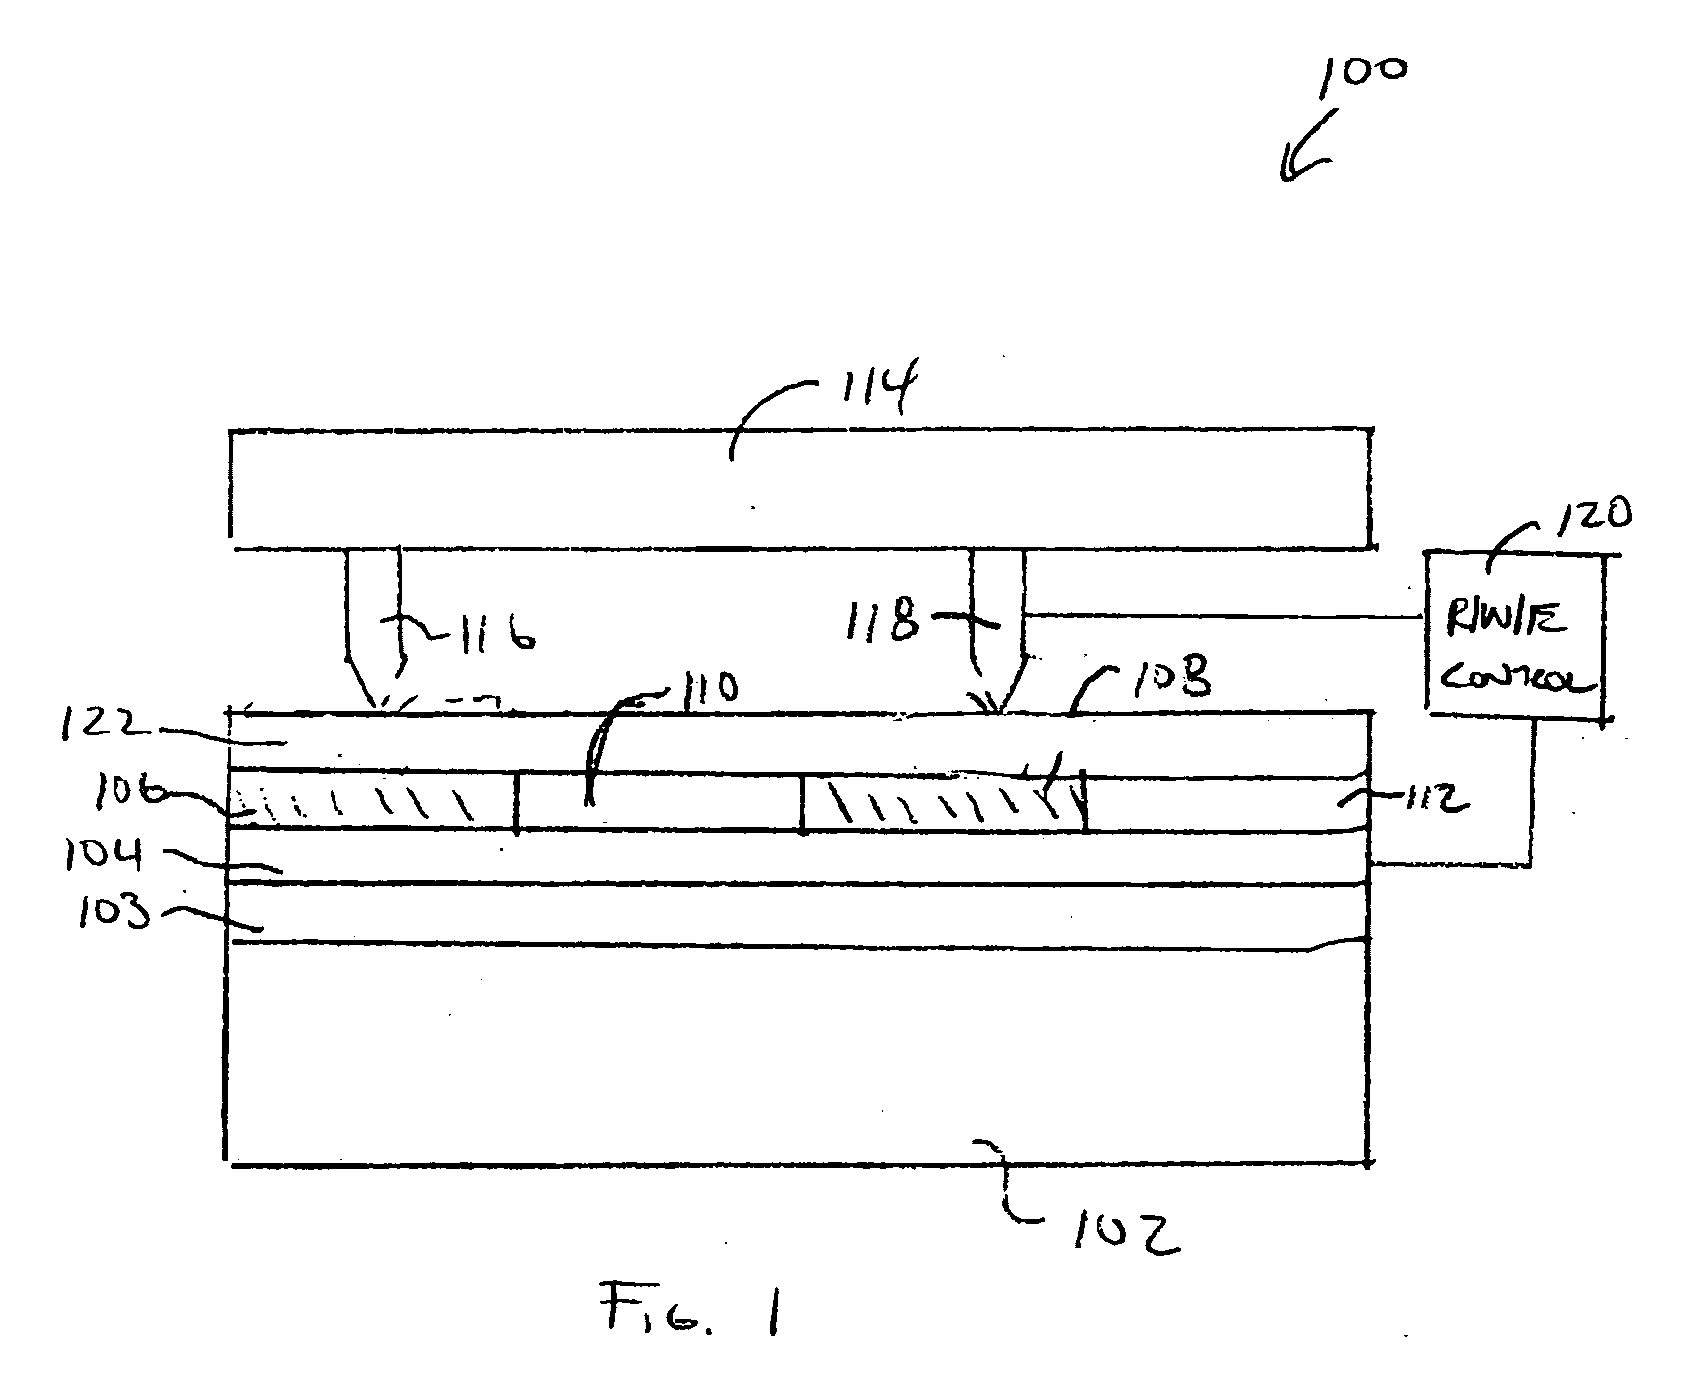 Solid electrolyte probe storage device, system including the device, and methods of forming and using same